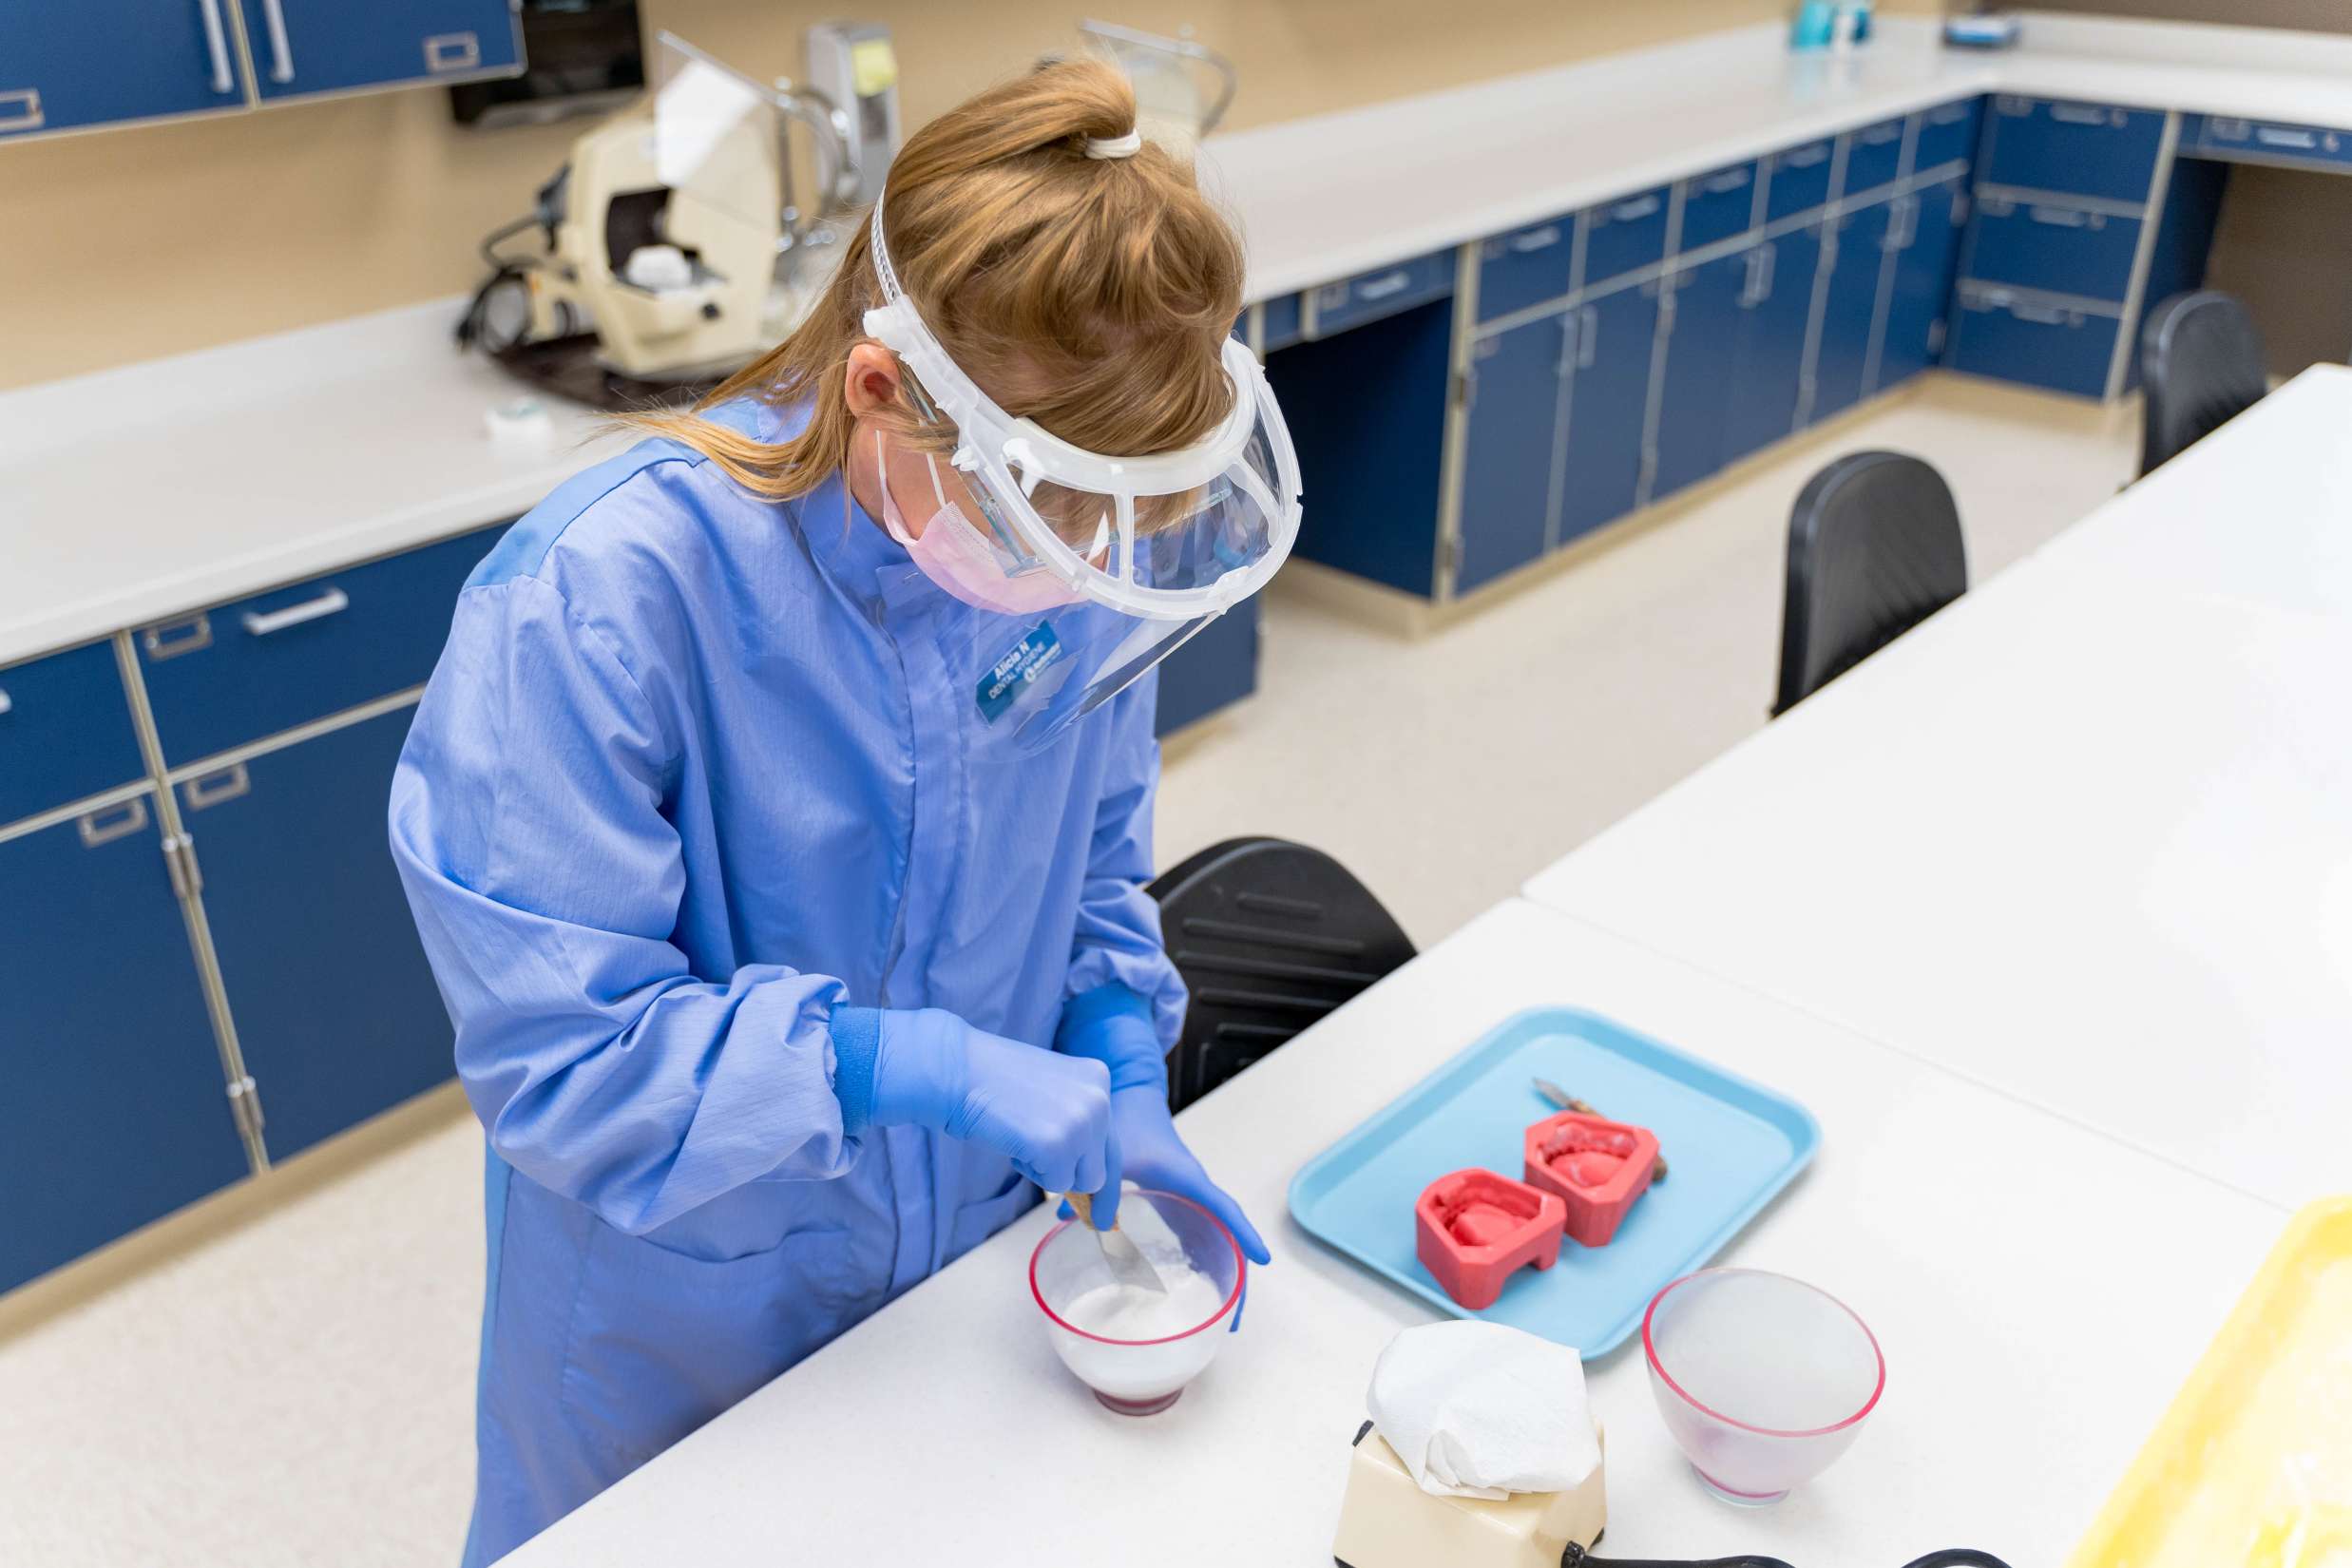 A dental Hygienist wearing blue medical garbs and a face shield is working with oral molds in a dental lab.